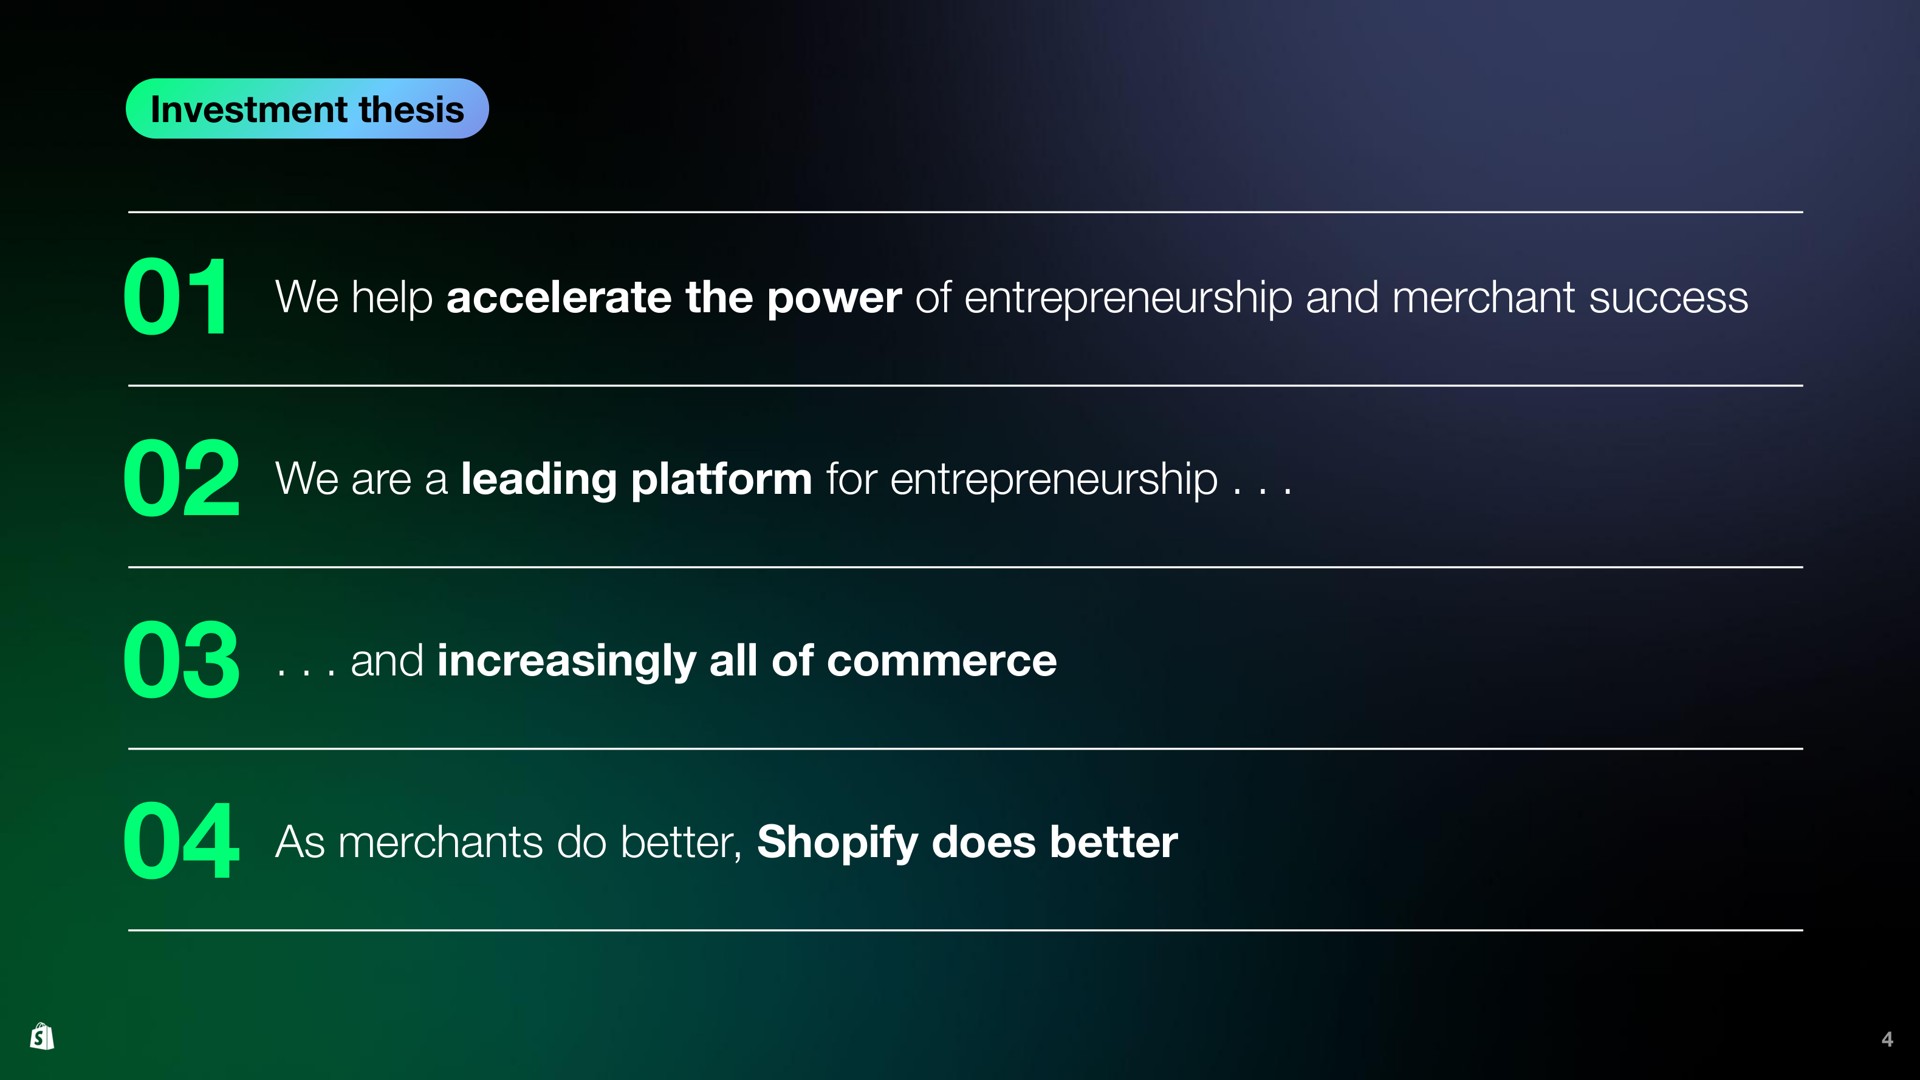 of we help accelerate the power of entrepreneurship and merchant success we are a leading platform for entrepreneurship and increasingly all of commerce as merchants do better does better | Shopify